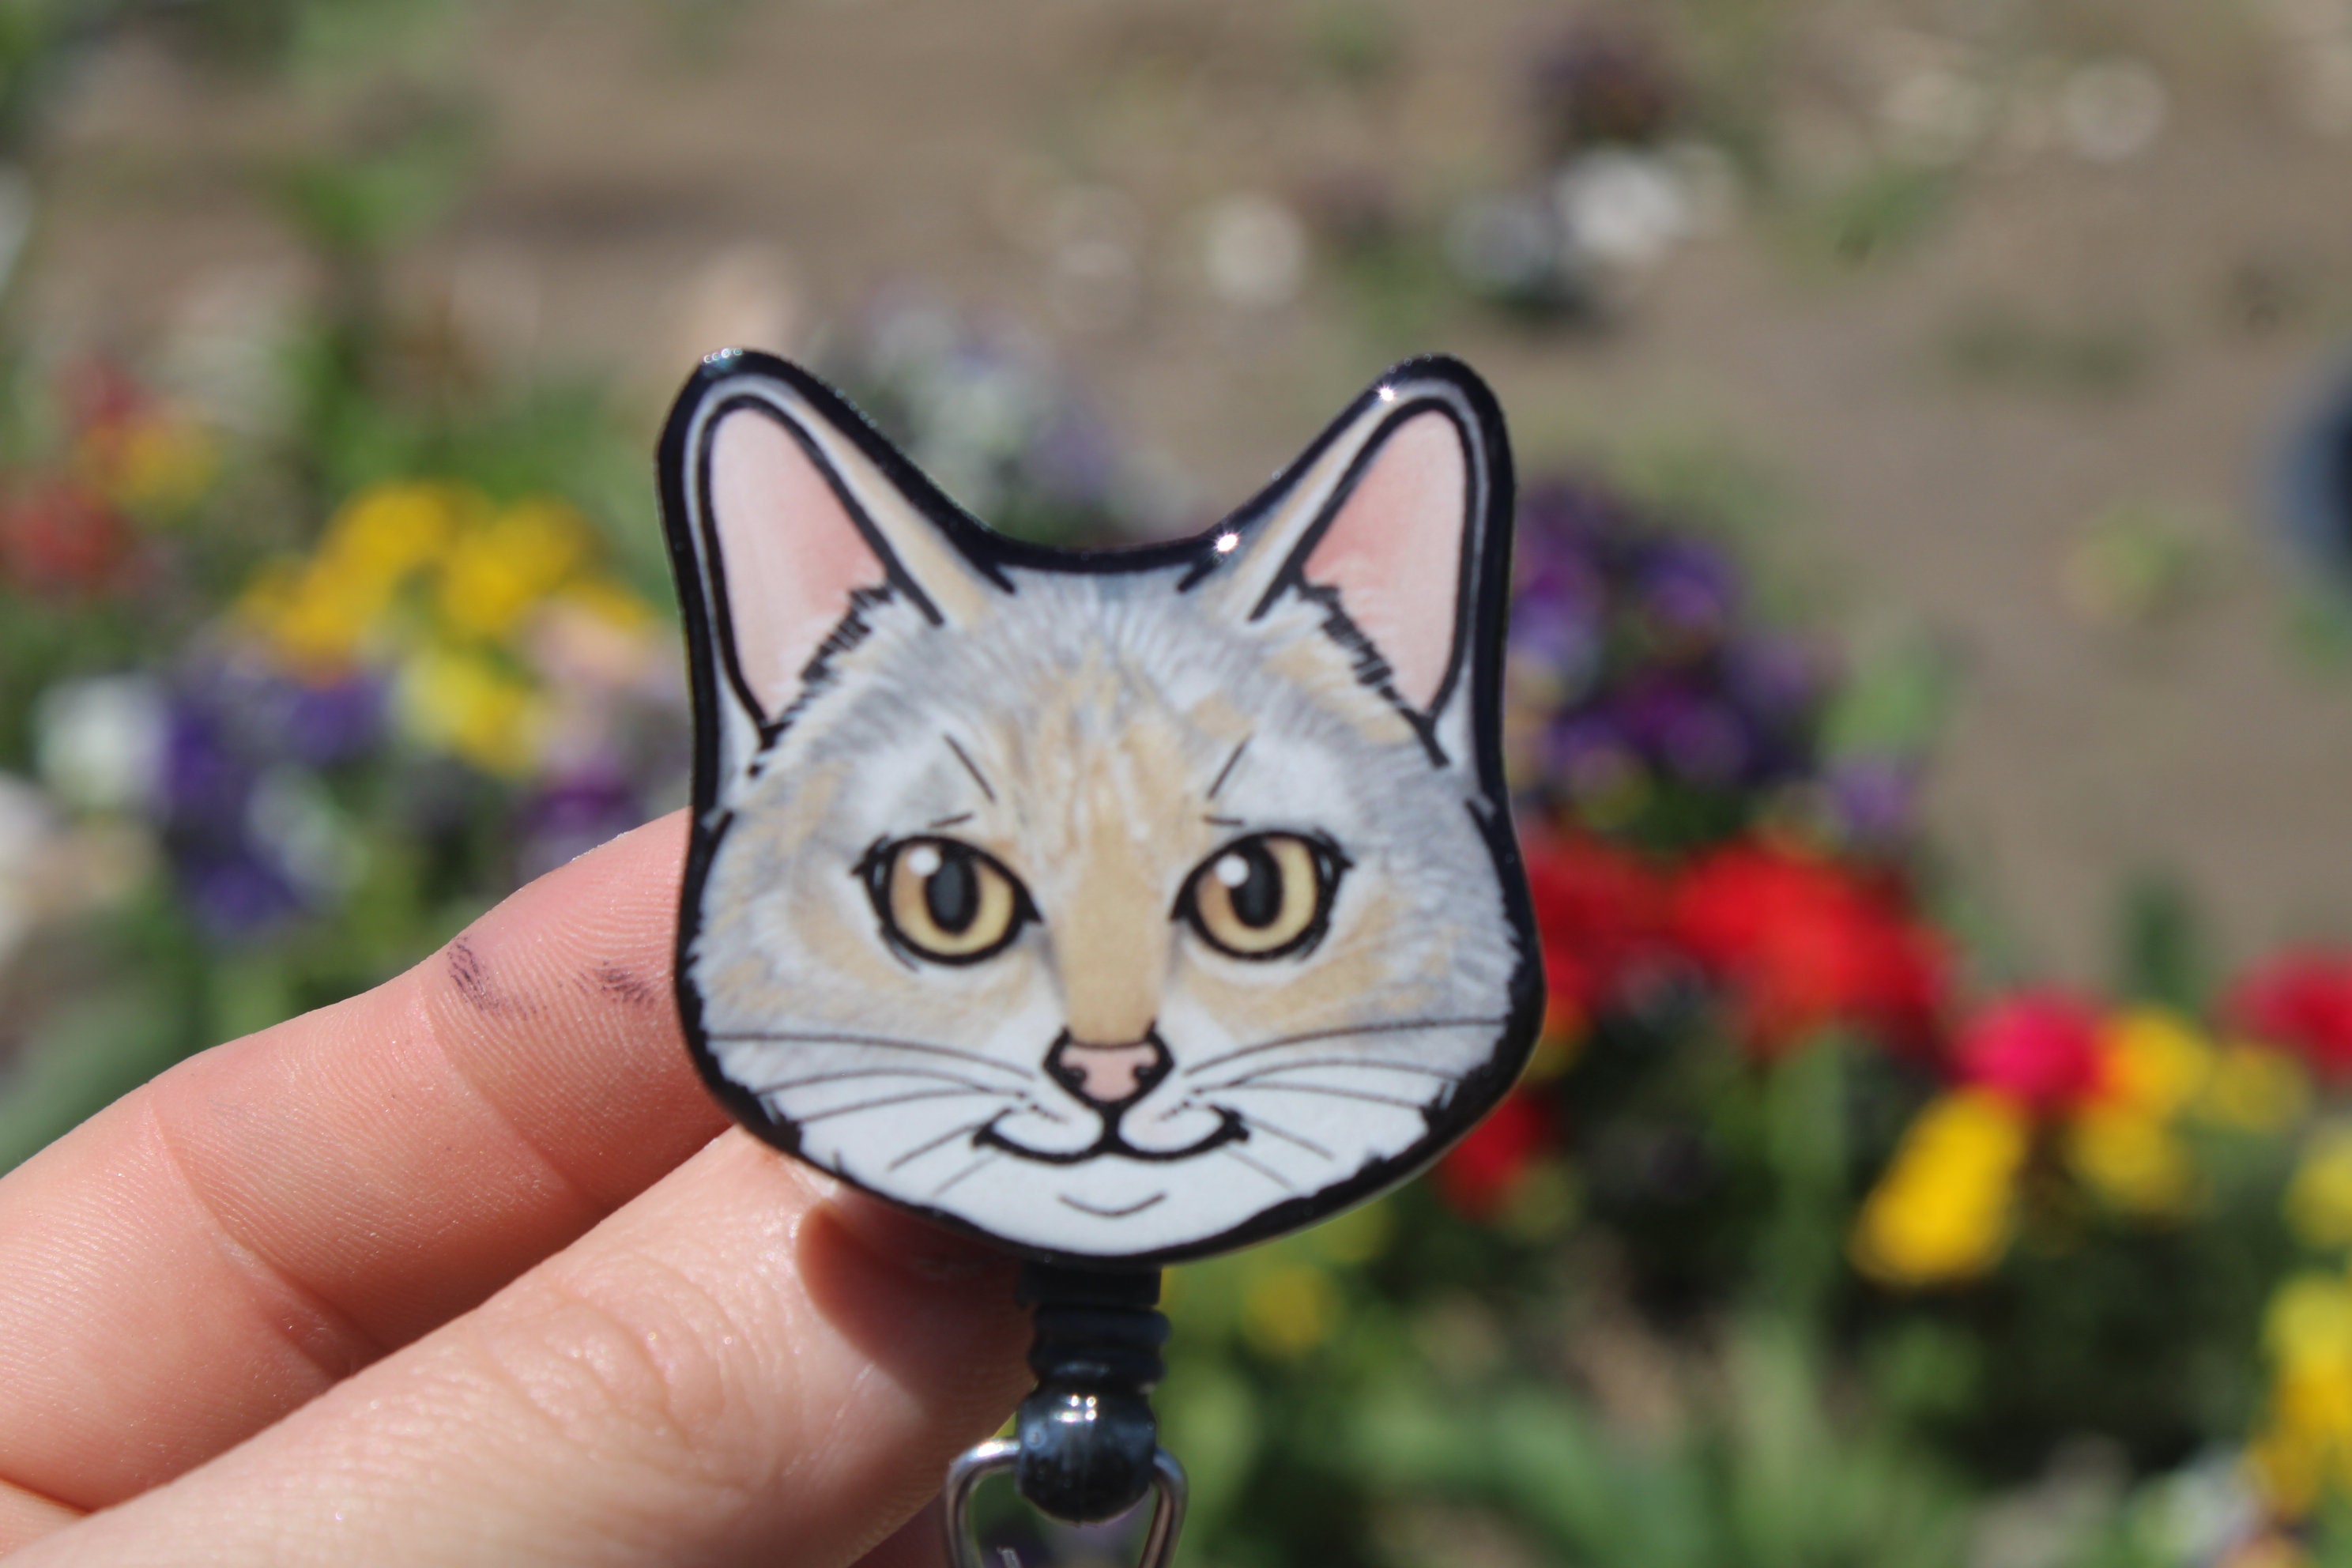 Dilute Calico Cat Badge Reel Id Holder: Gift for Cat Lovers